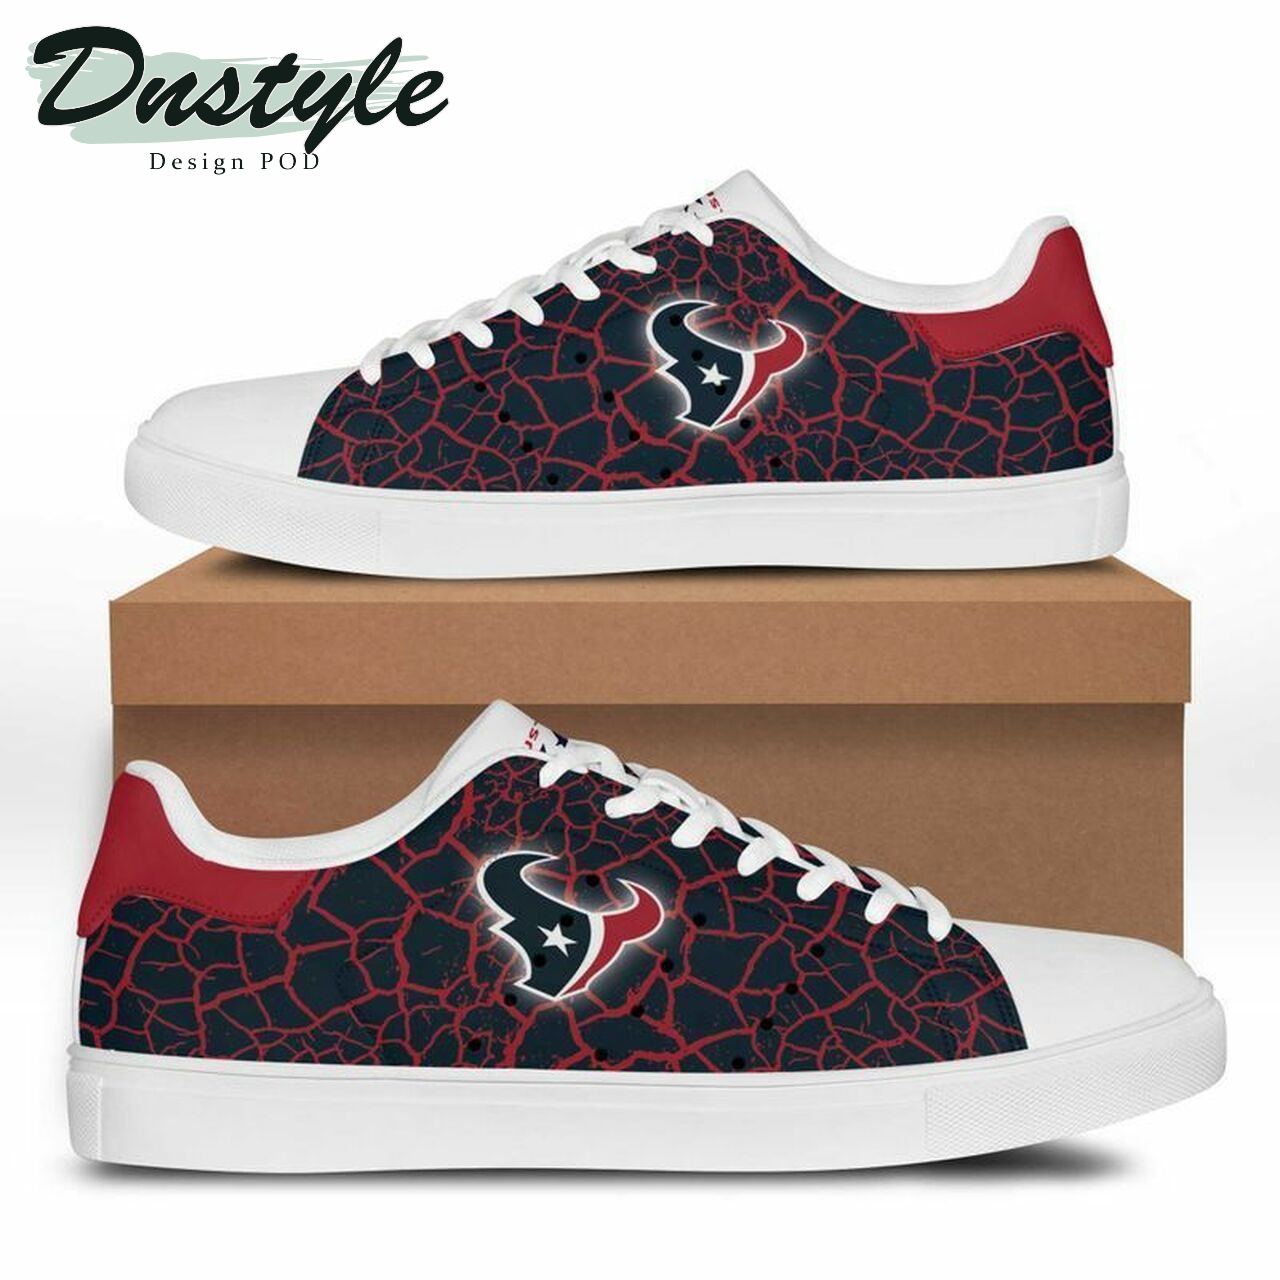 Houston texans stan smith low top skate shoes NFL